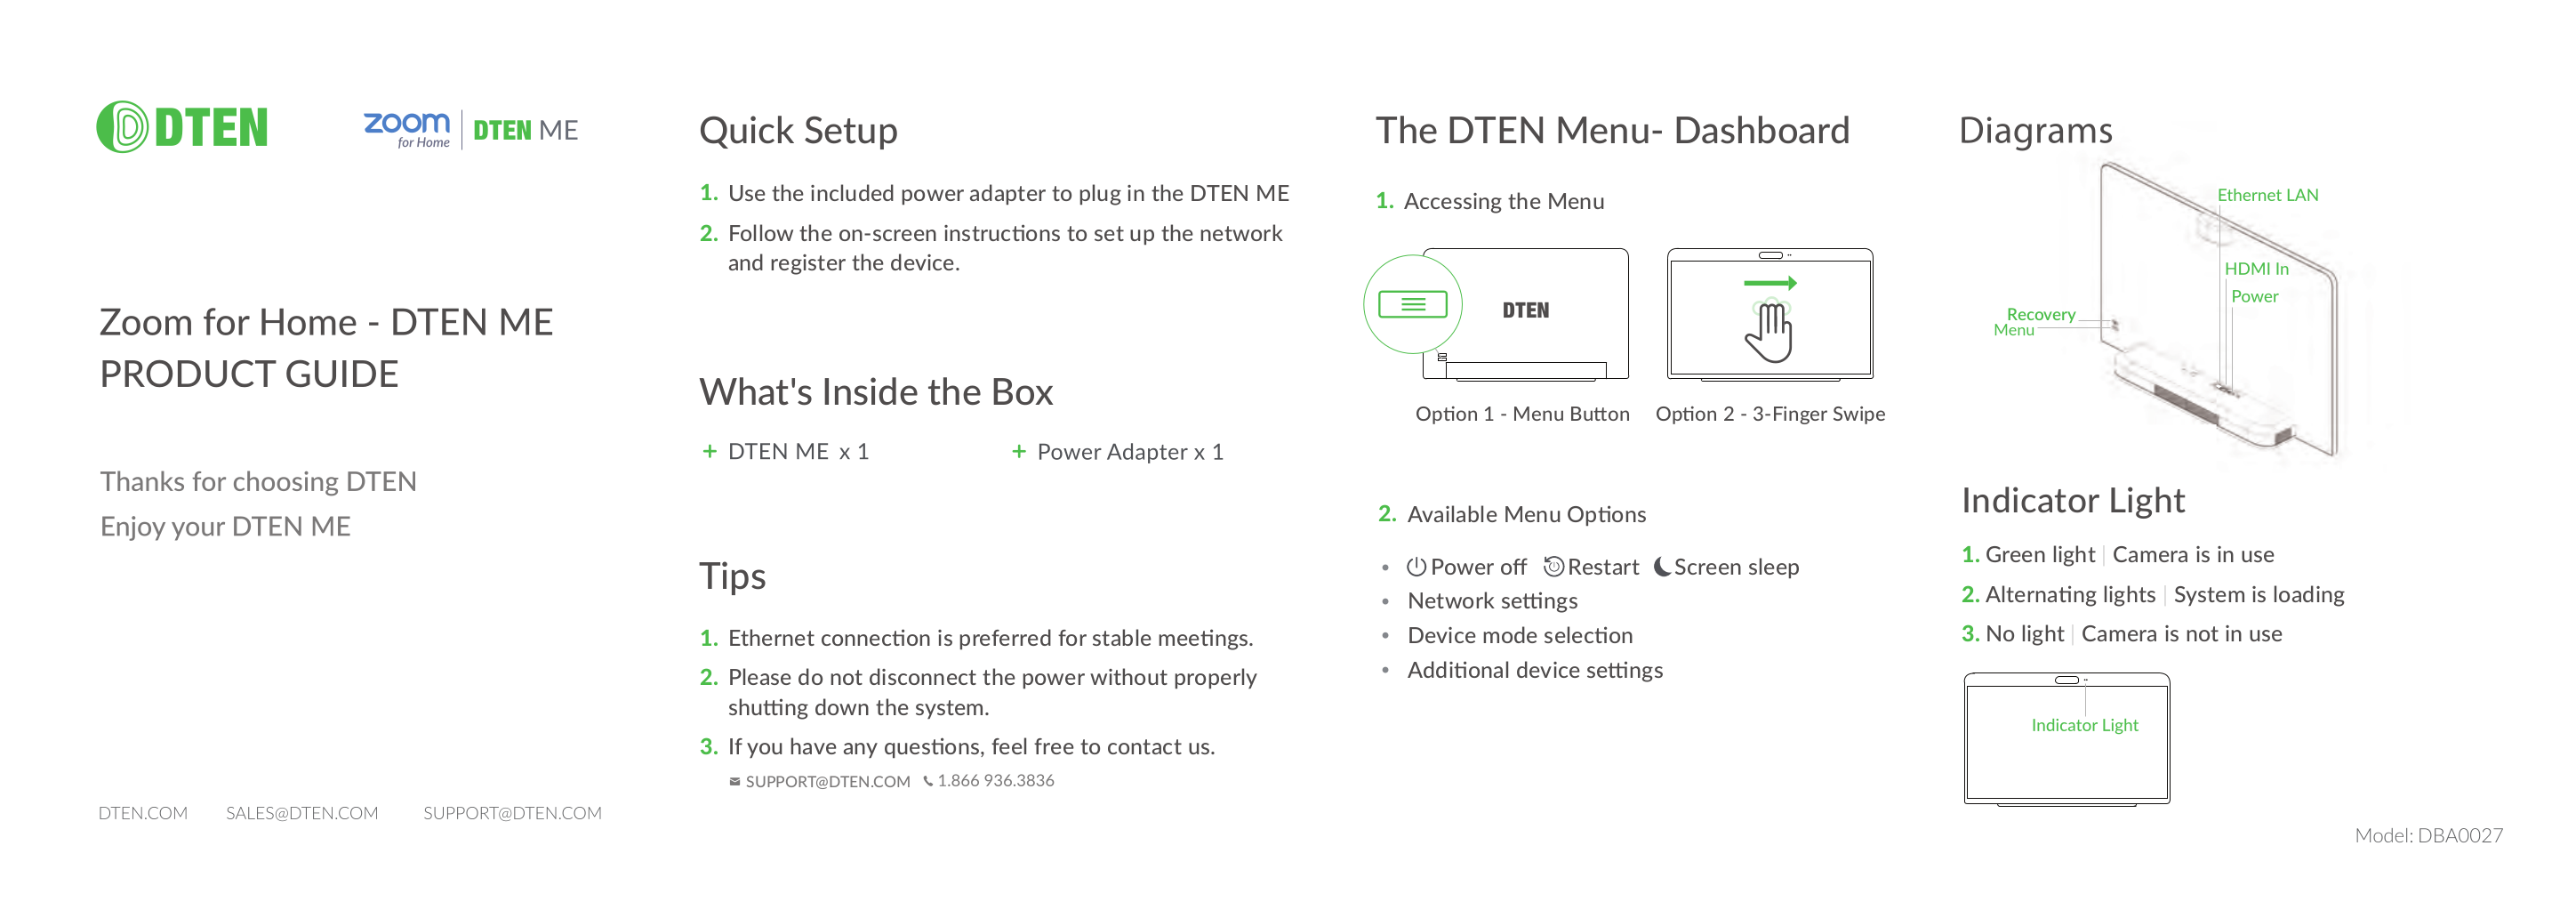 DTEN_ME_Product_Guide_0909_sm.png